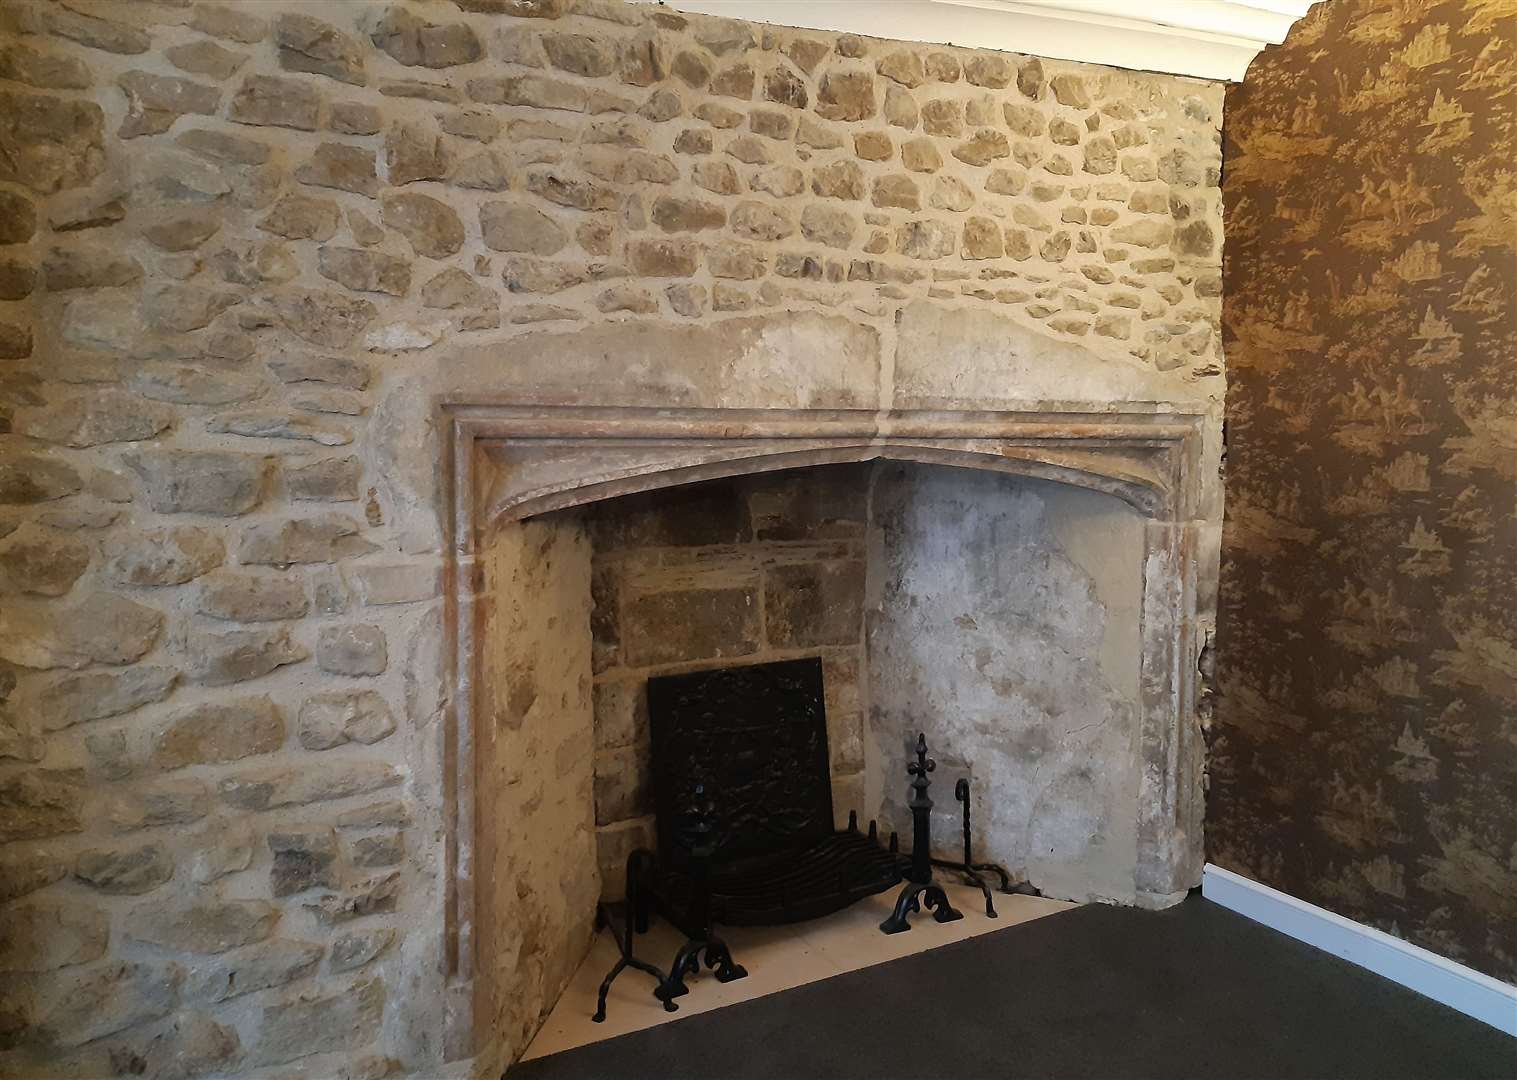 The Tudor fireplace discovered during the renovation work